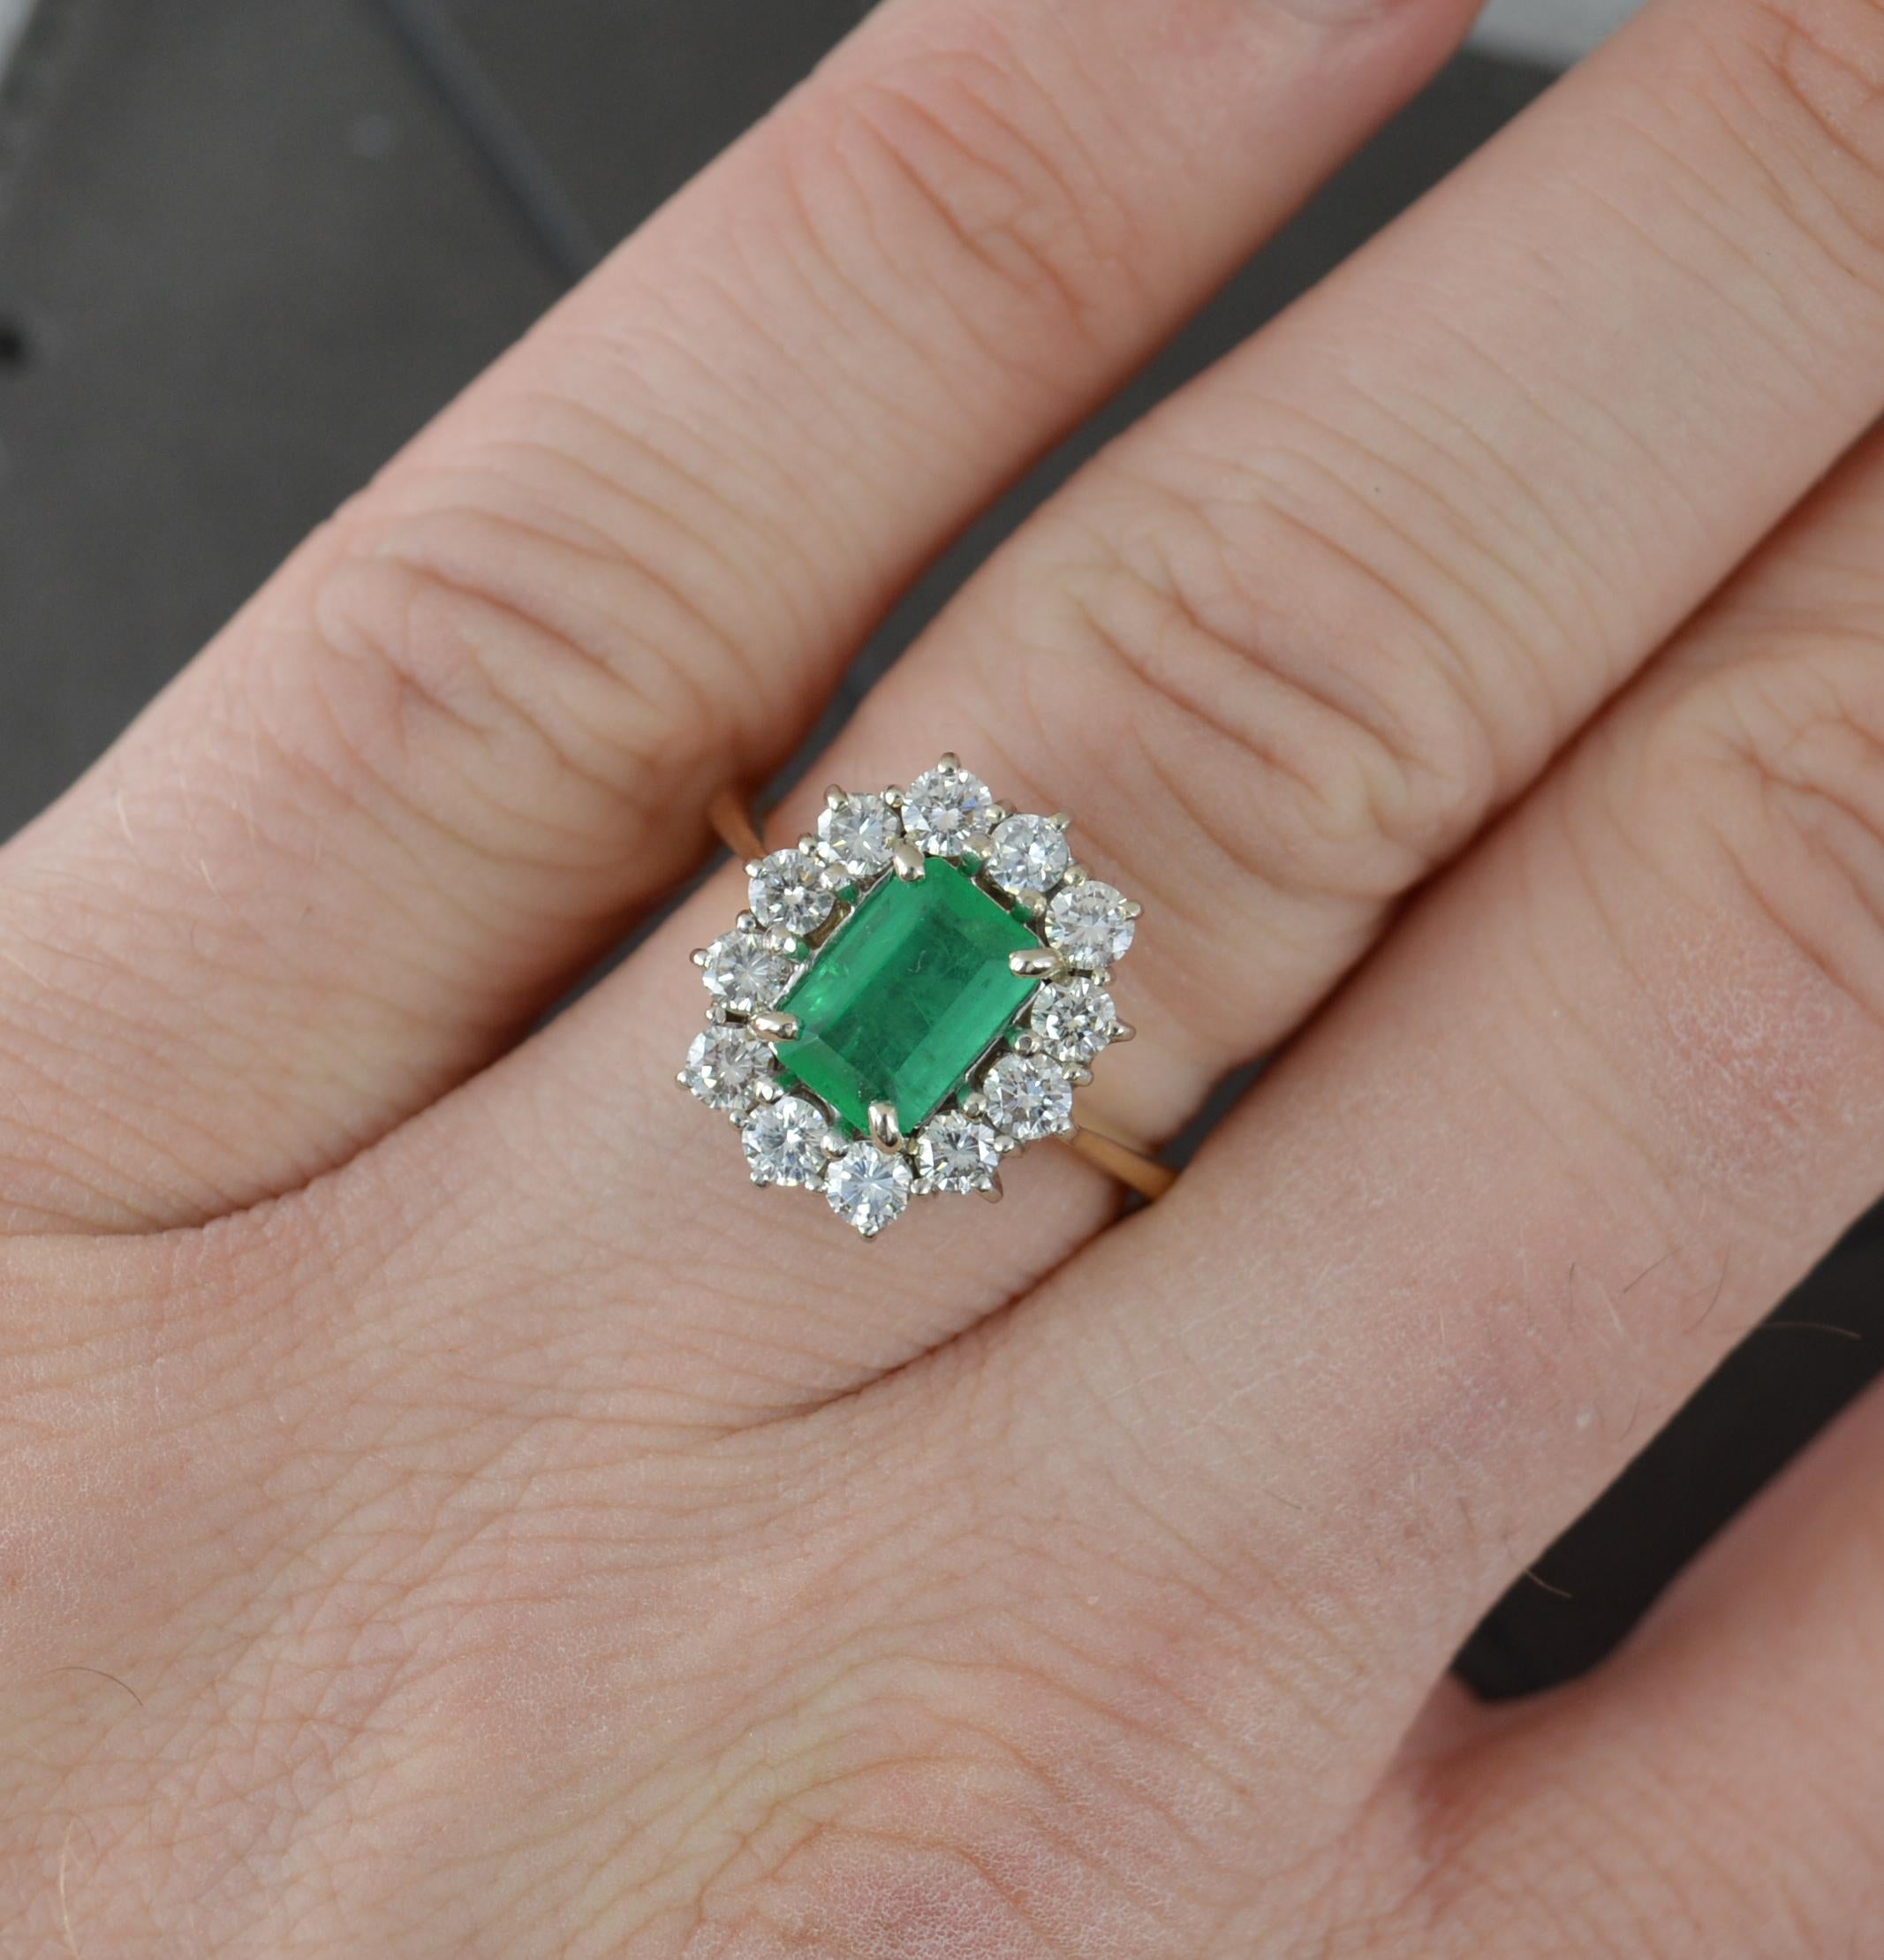 A superb emerald and diamond ring.
Solid 18 carat yellow gold shank with white gold head setting.
Designed with an emerald cut emerald to the centre, 5.25mm x 7.8mm. Surrounding is a full border of twelve round brilliant cut diamonds to total approx